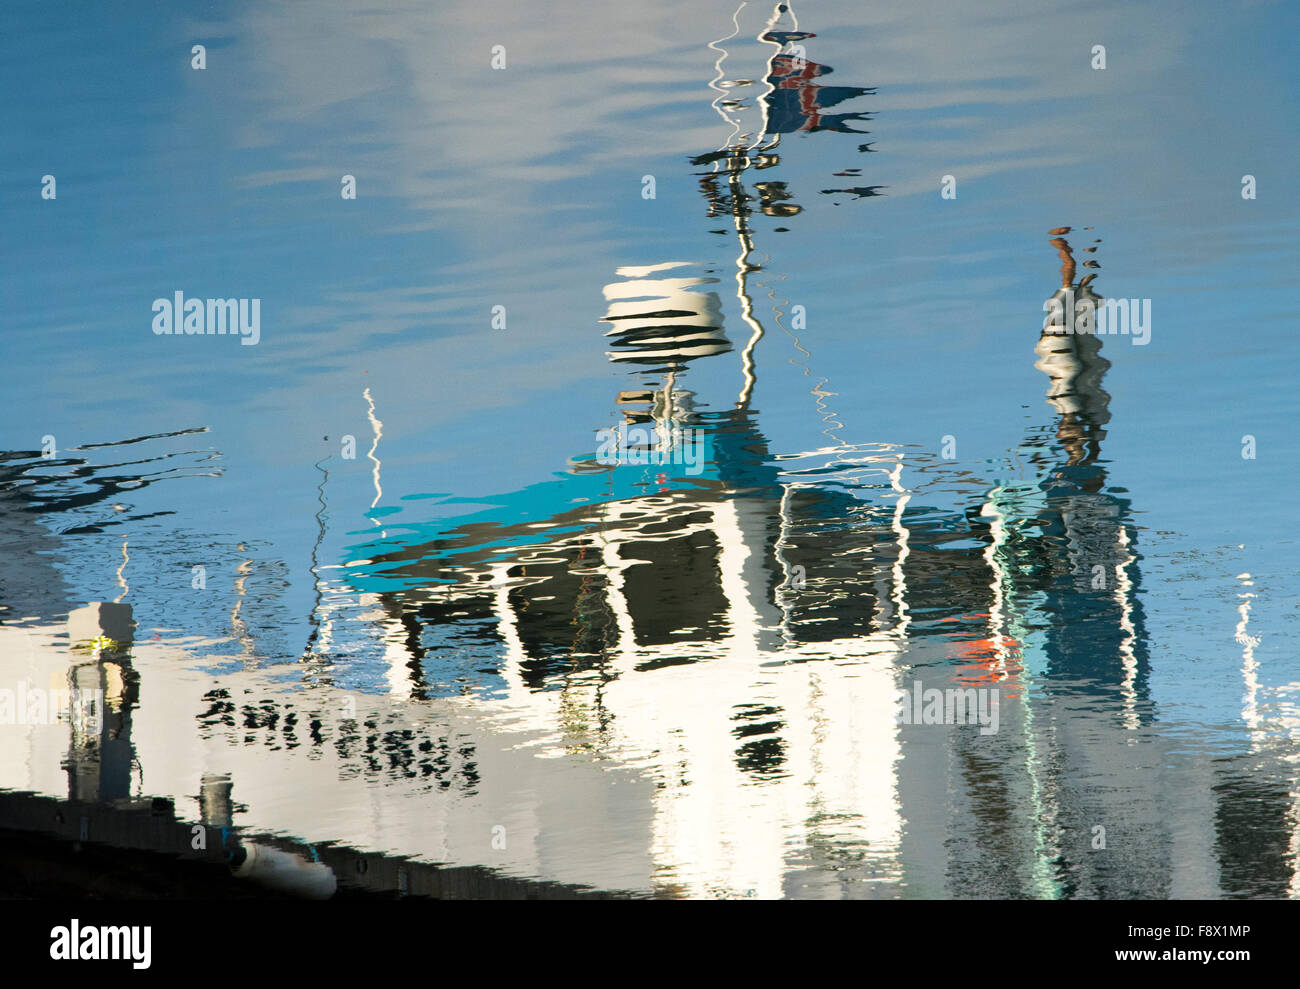 Reykjavik, Iceland. Reflection on the water of a boat. Stock Photo